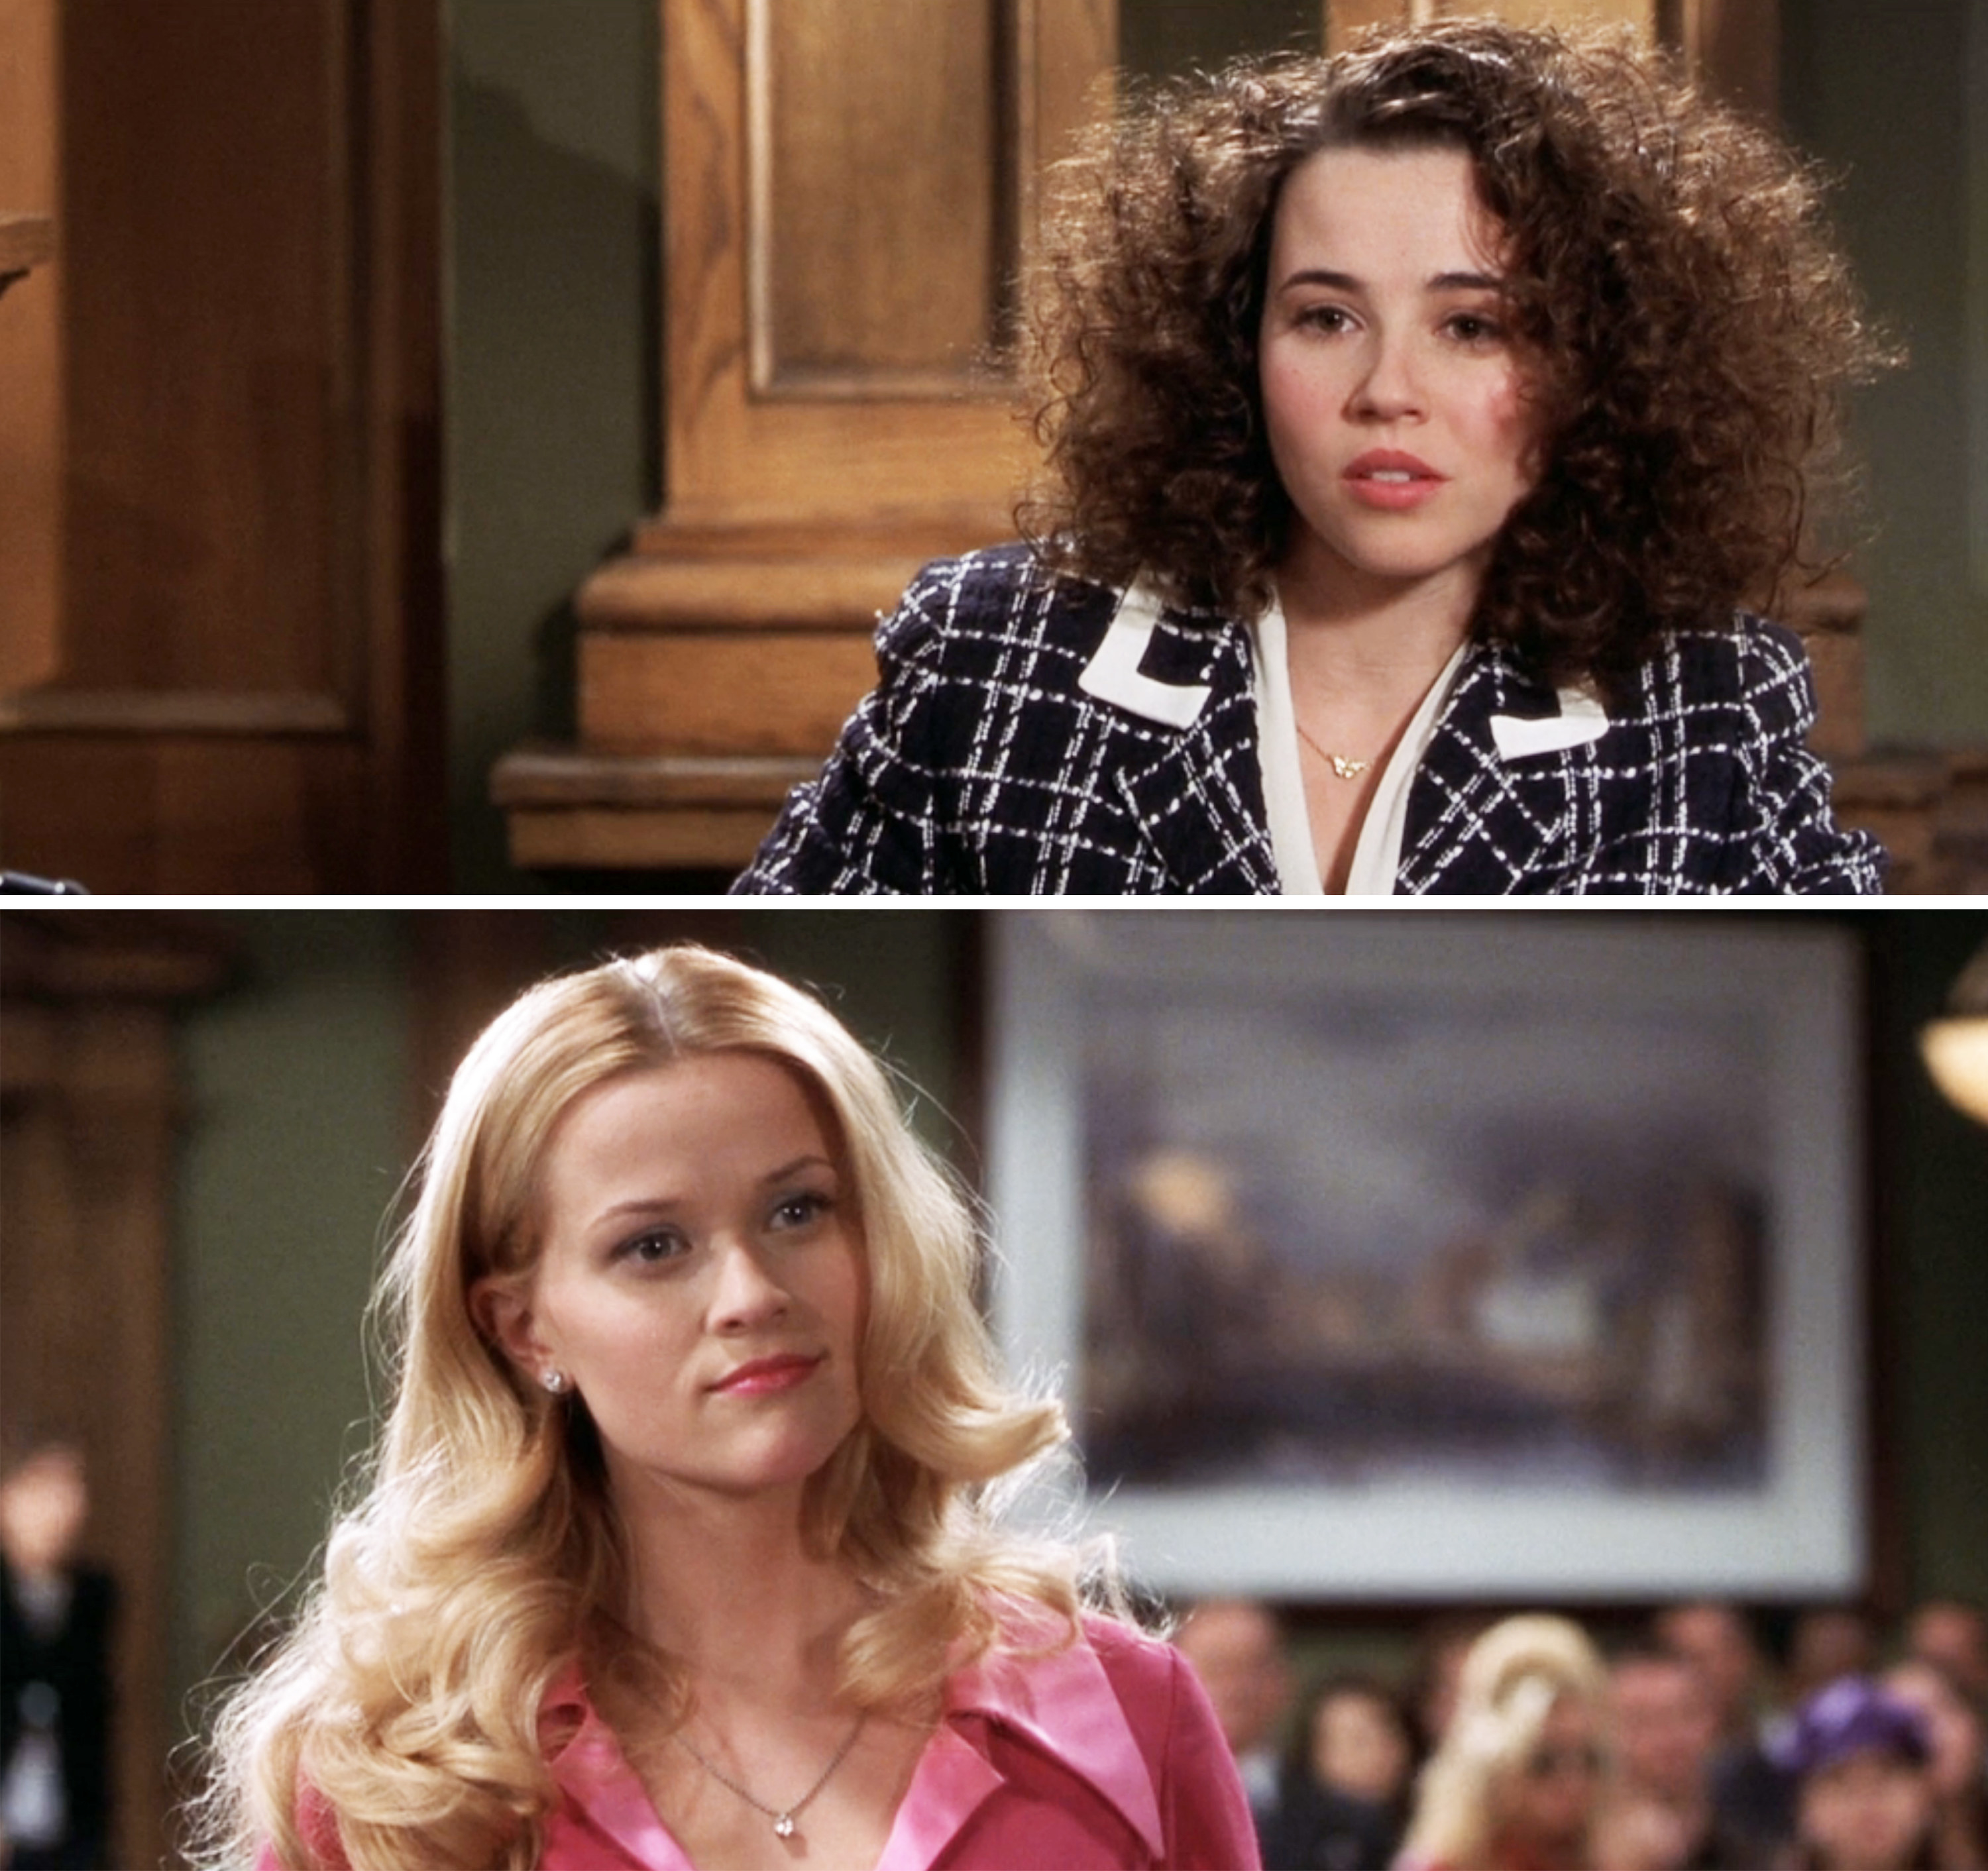 Linda with big hair and Reese in court